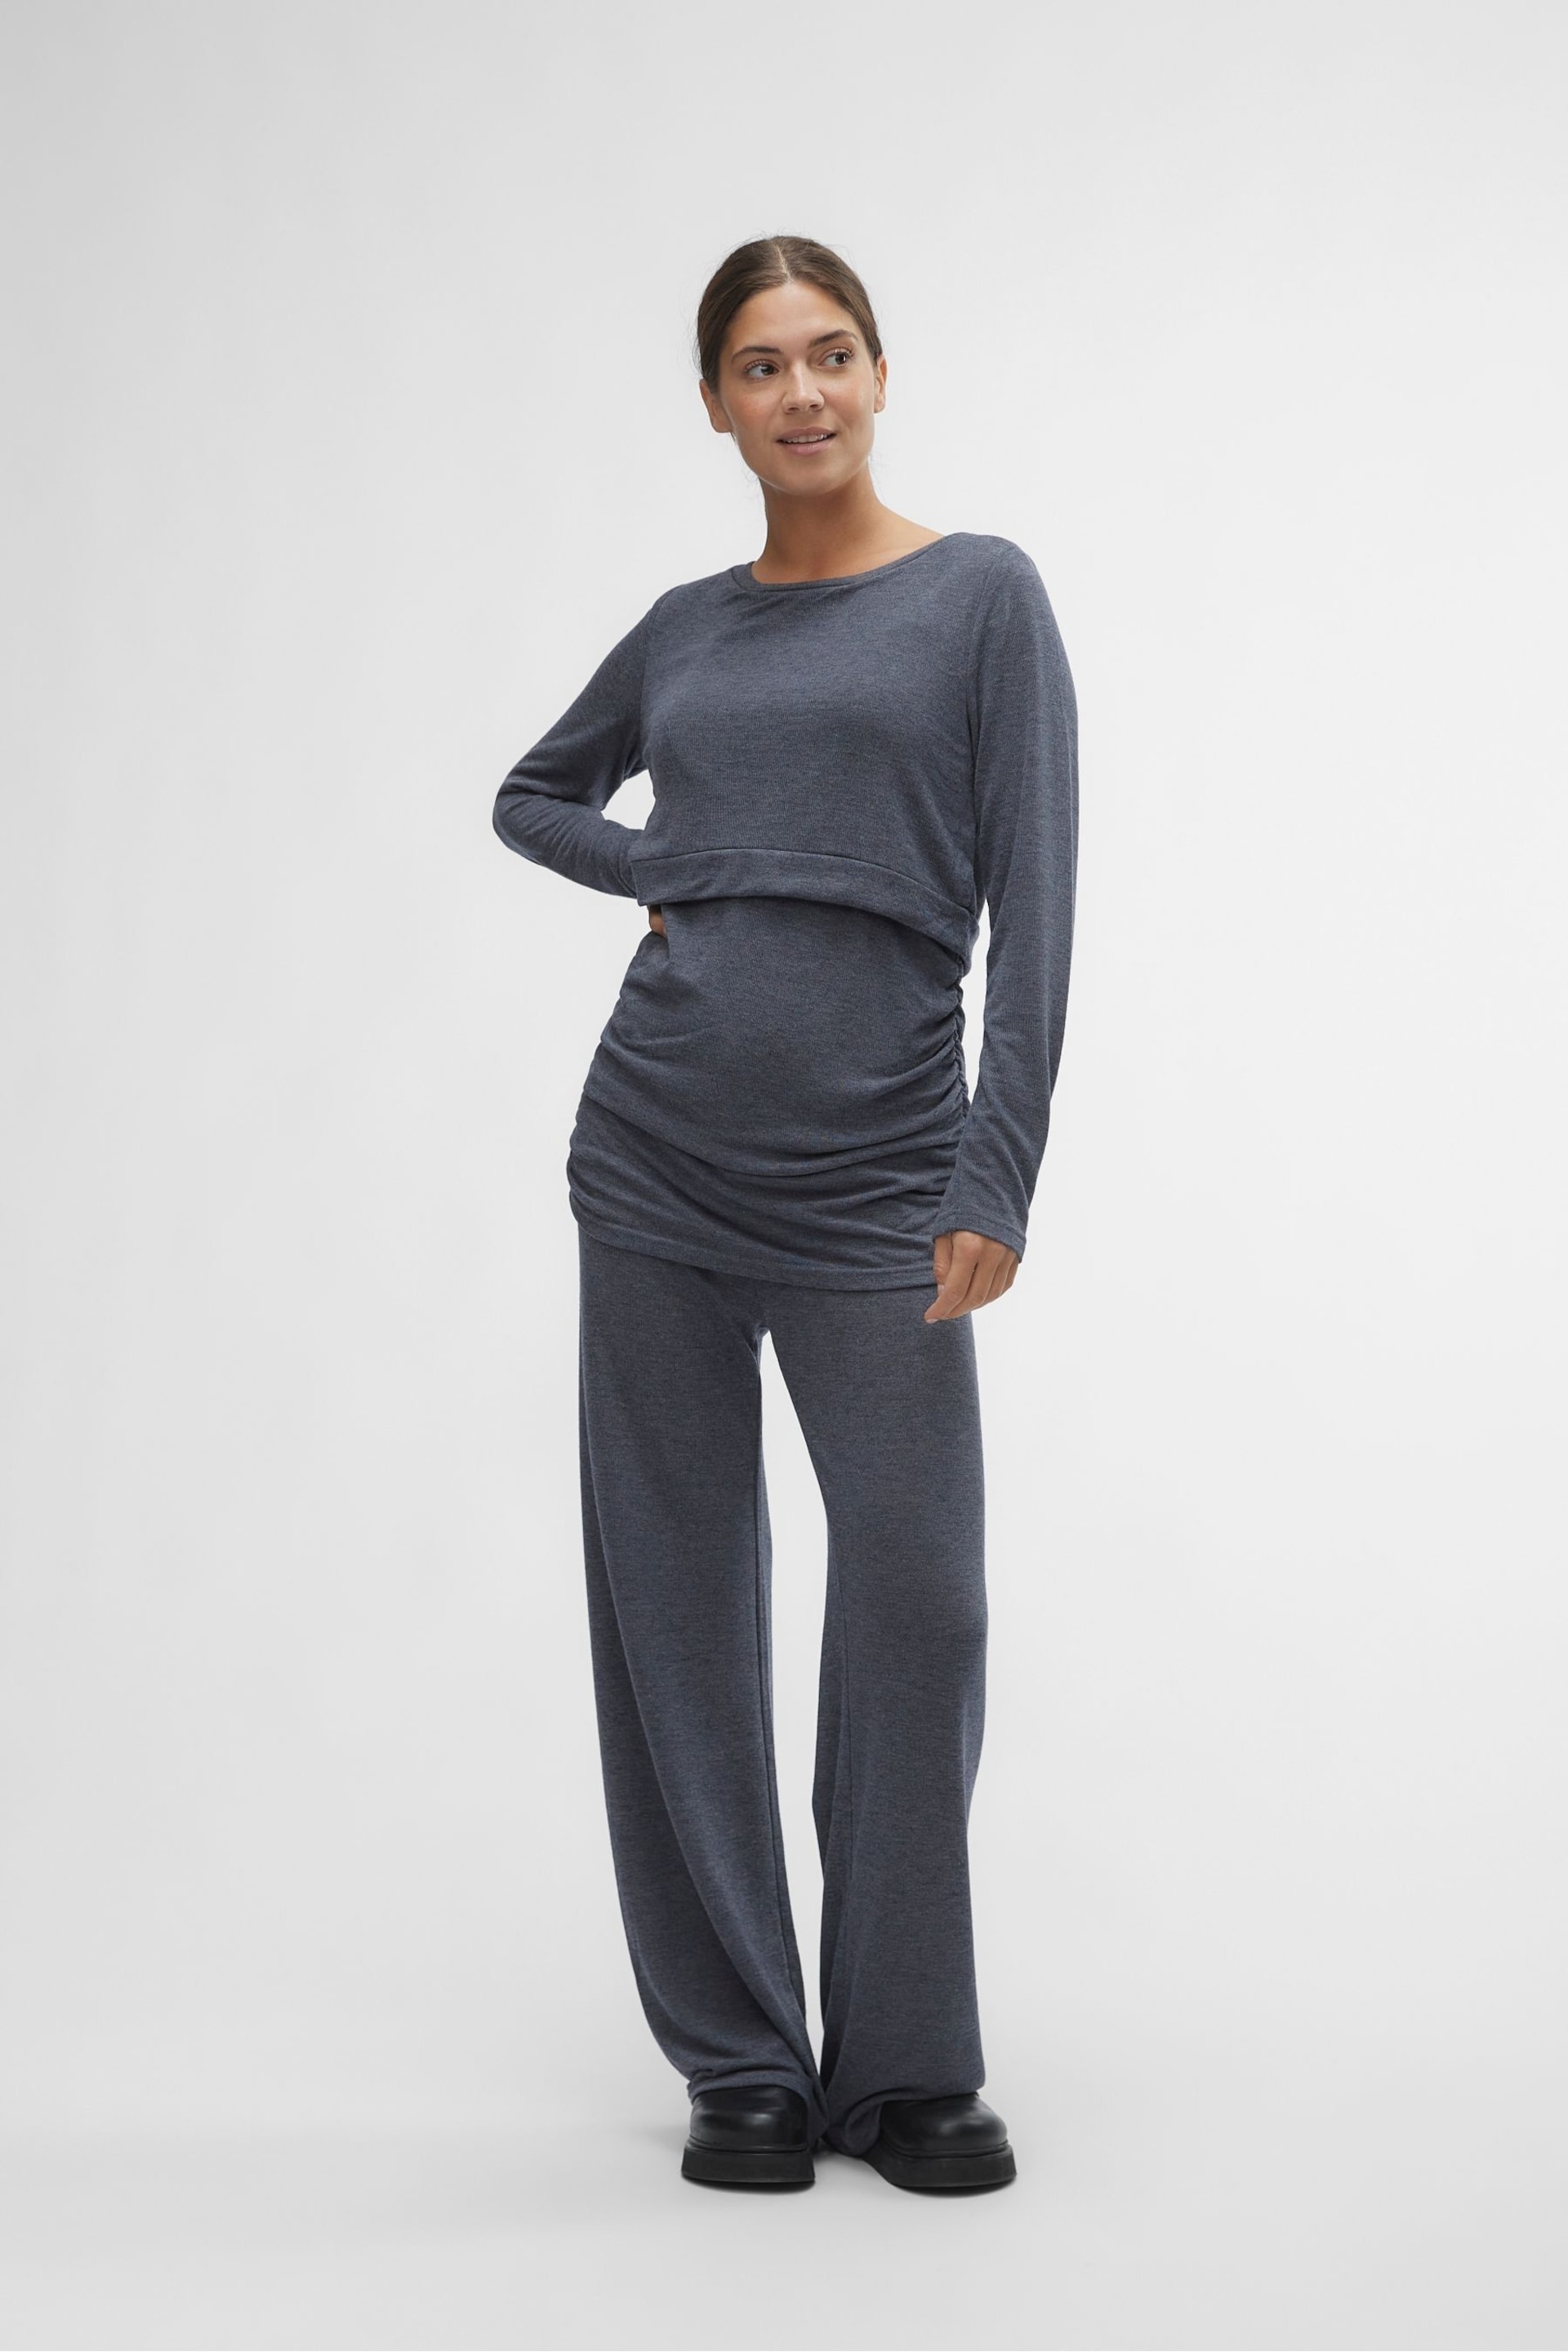 Mamalicious Grey Maternity Lightweight Knitted Jumper With Nursing Function - Image 4 of 6